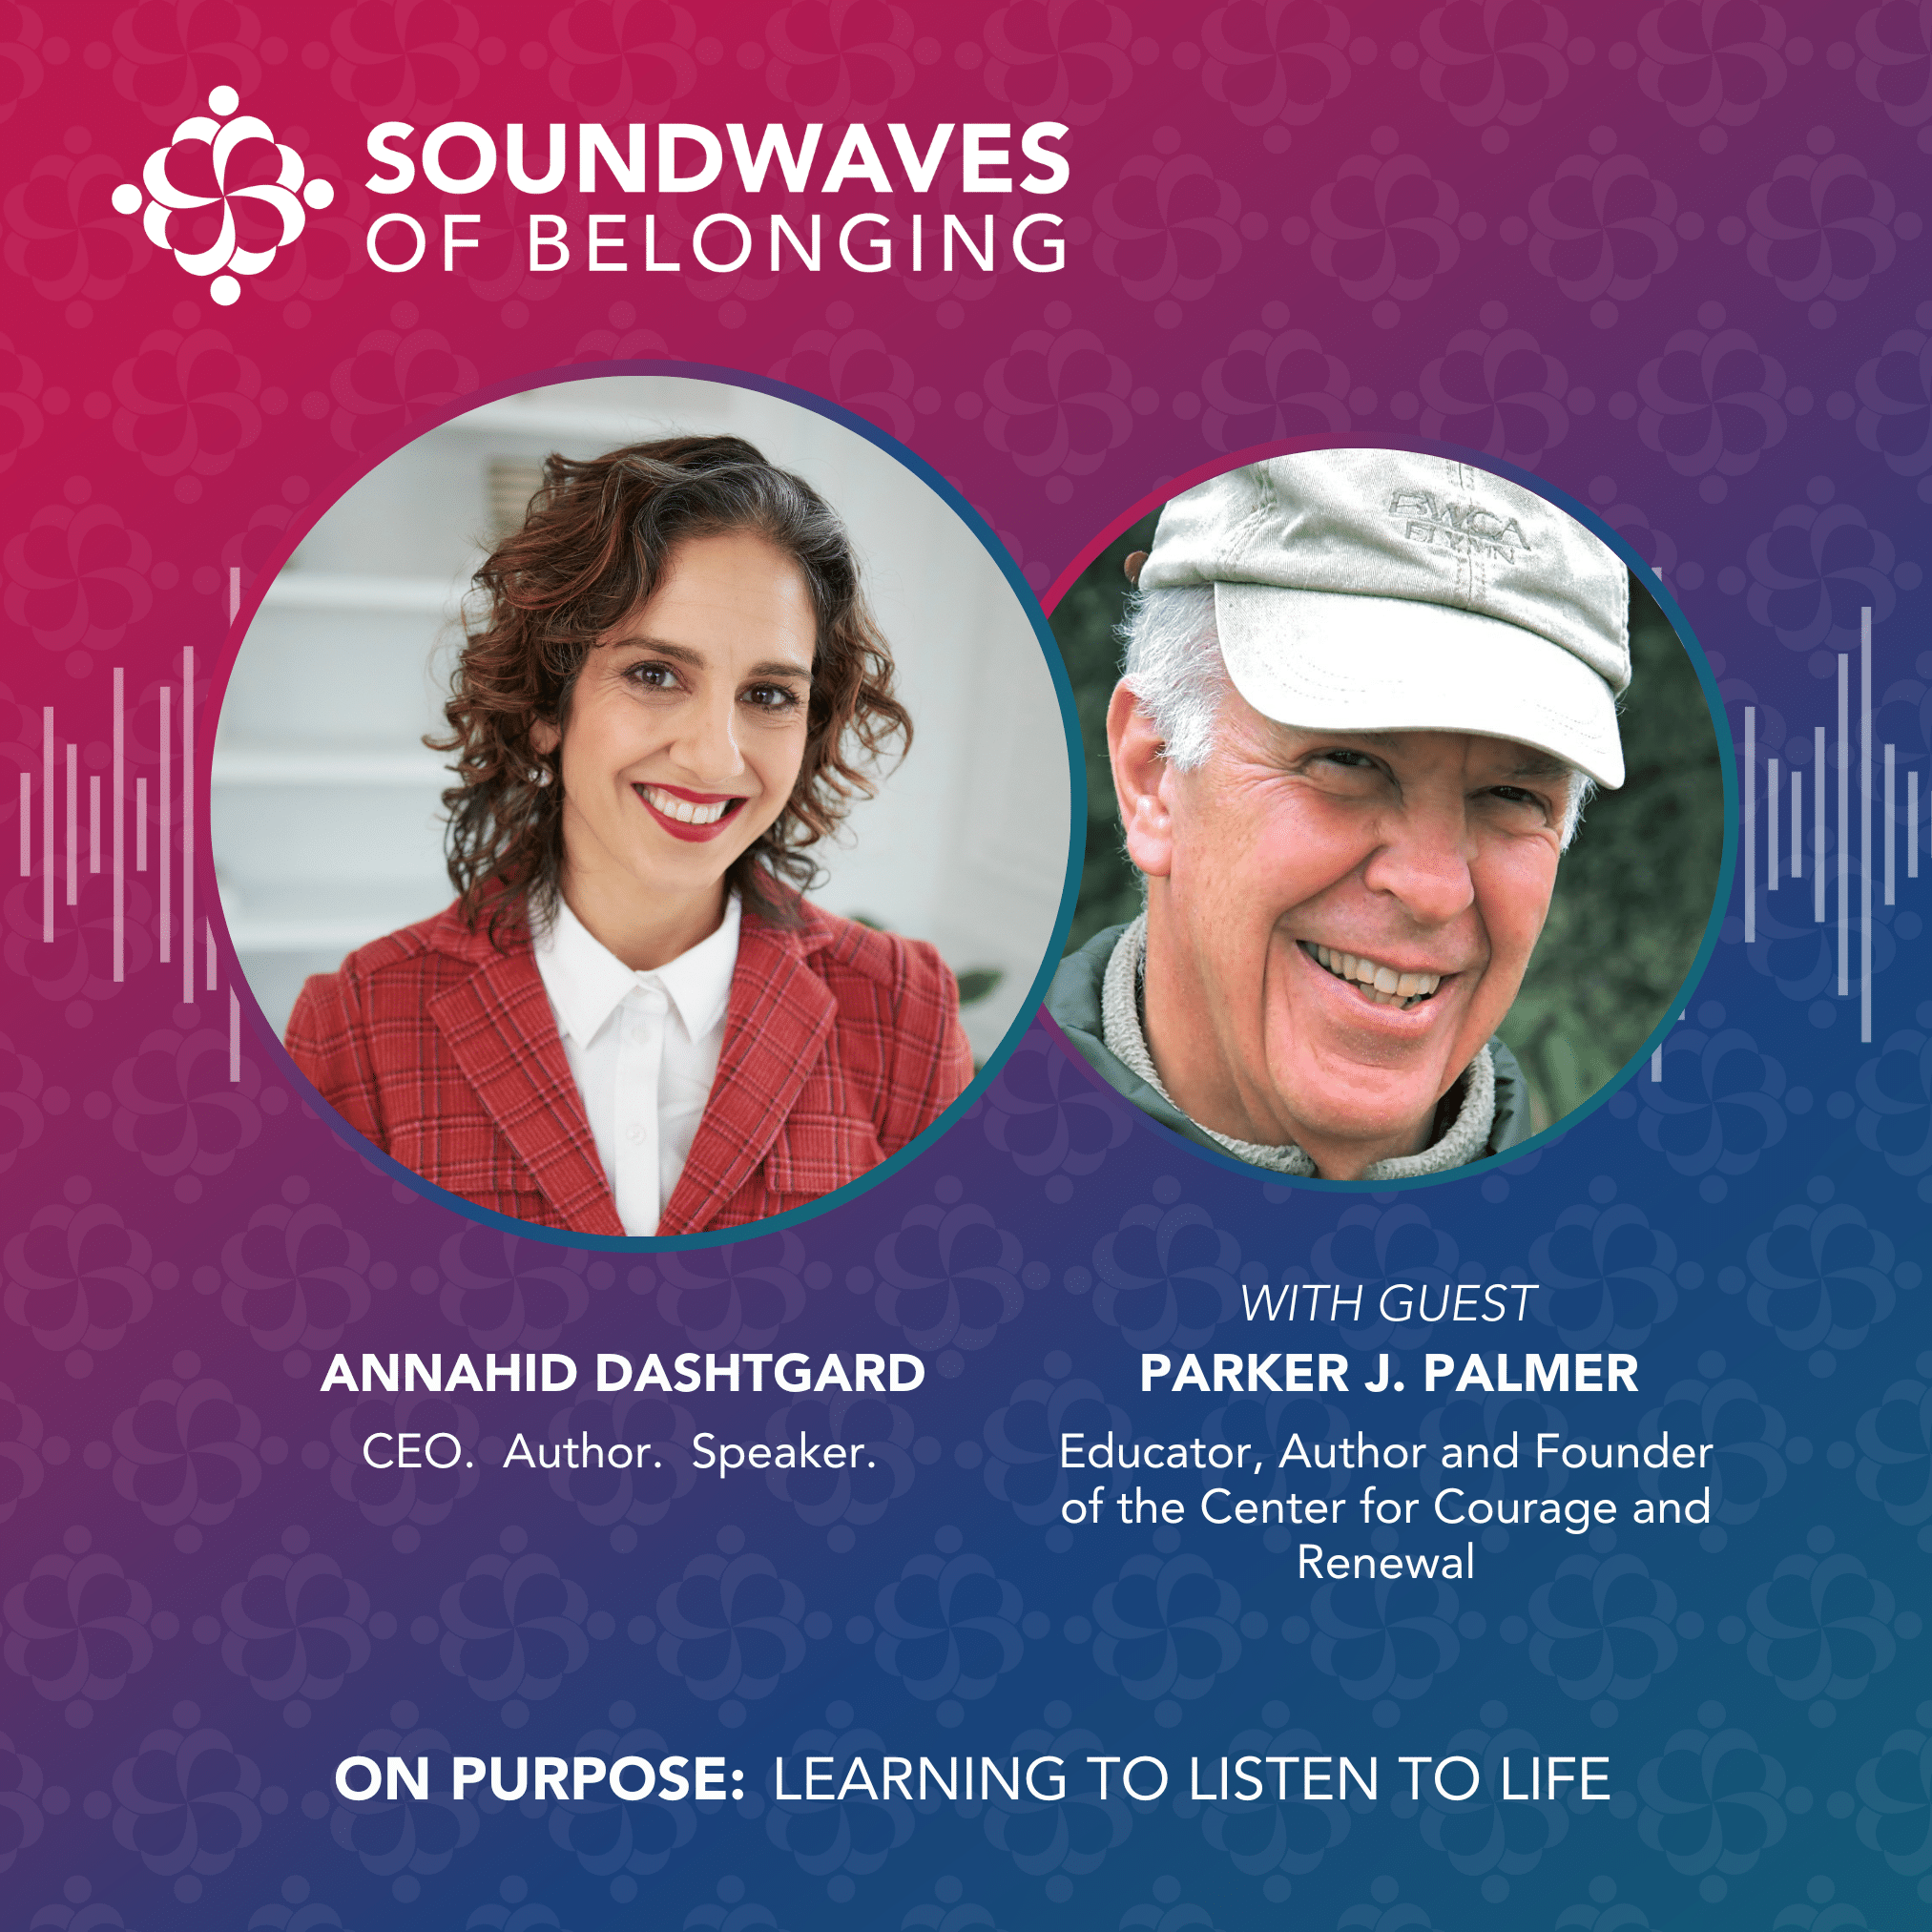 Annahid Dashtgard and Parker Palmer on Soundwaves of Belonging podcast.